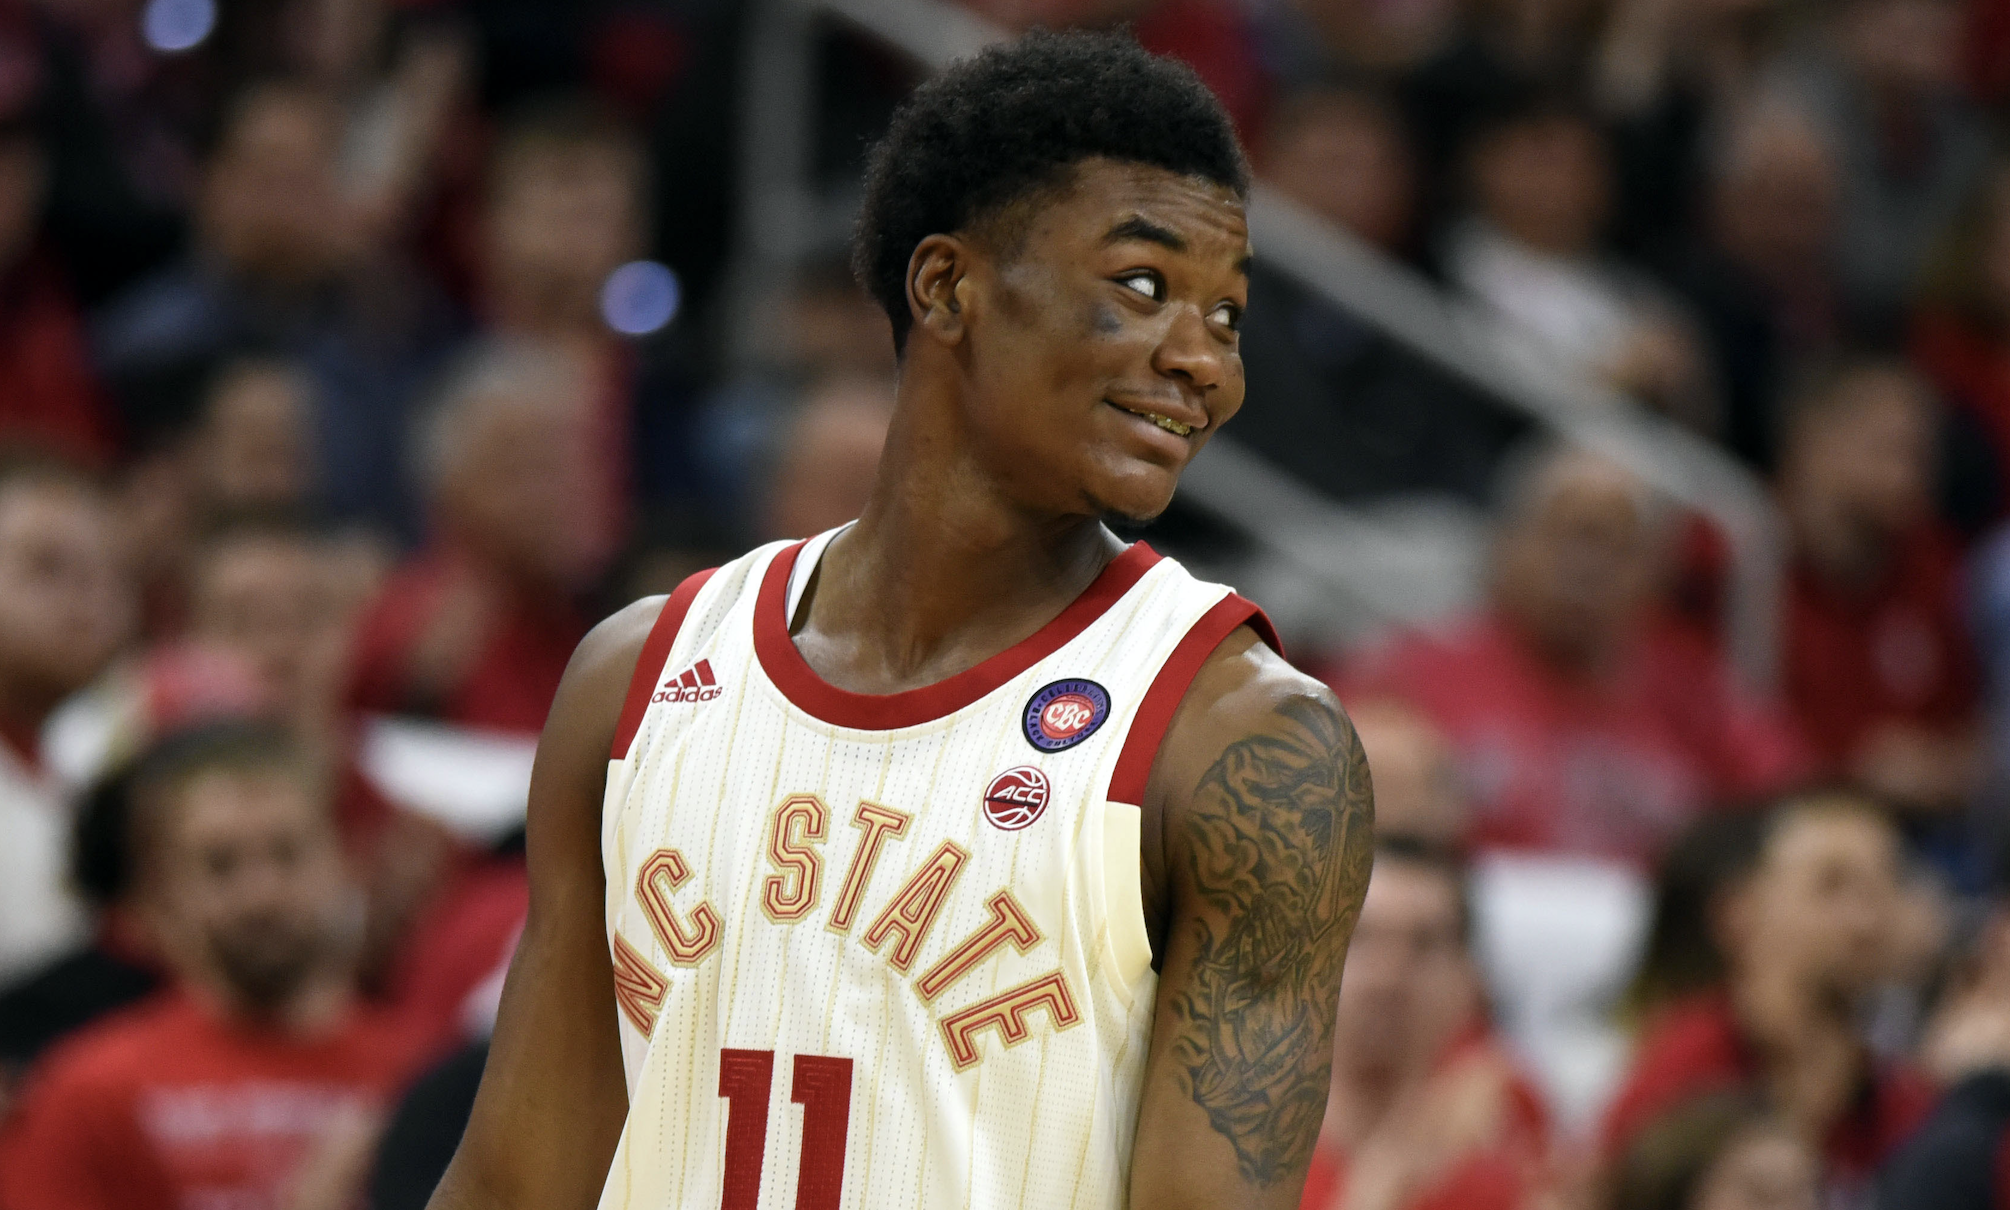 CBSSports Ranks NC States Markell Johnson as the #48 Player in College Basketball